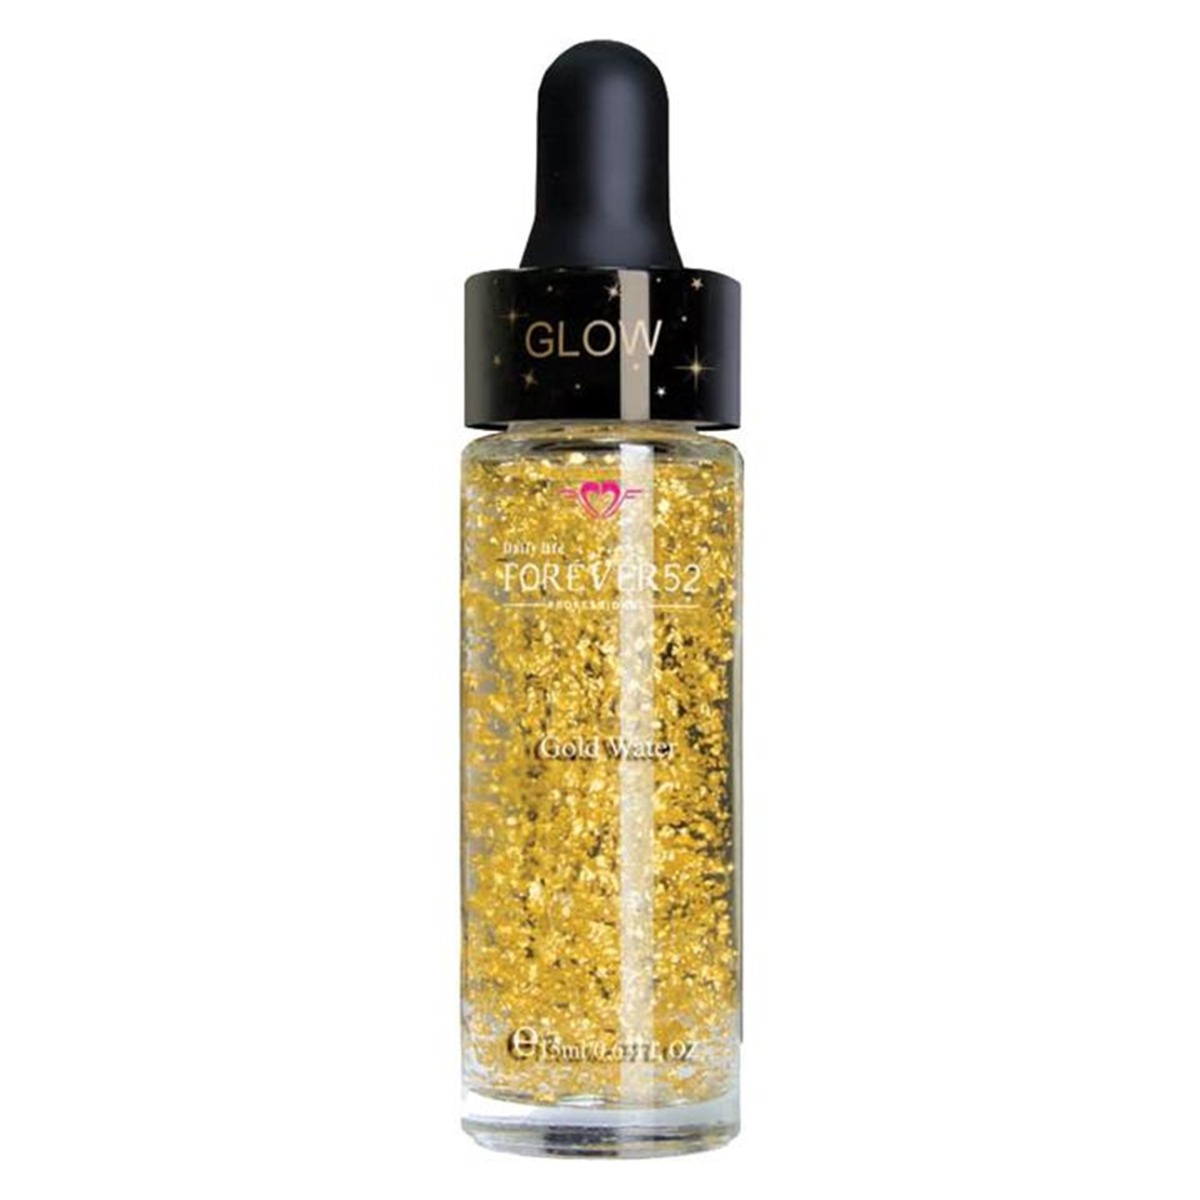 Forever52 Gold Water, 15ml